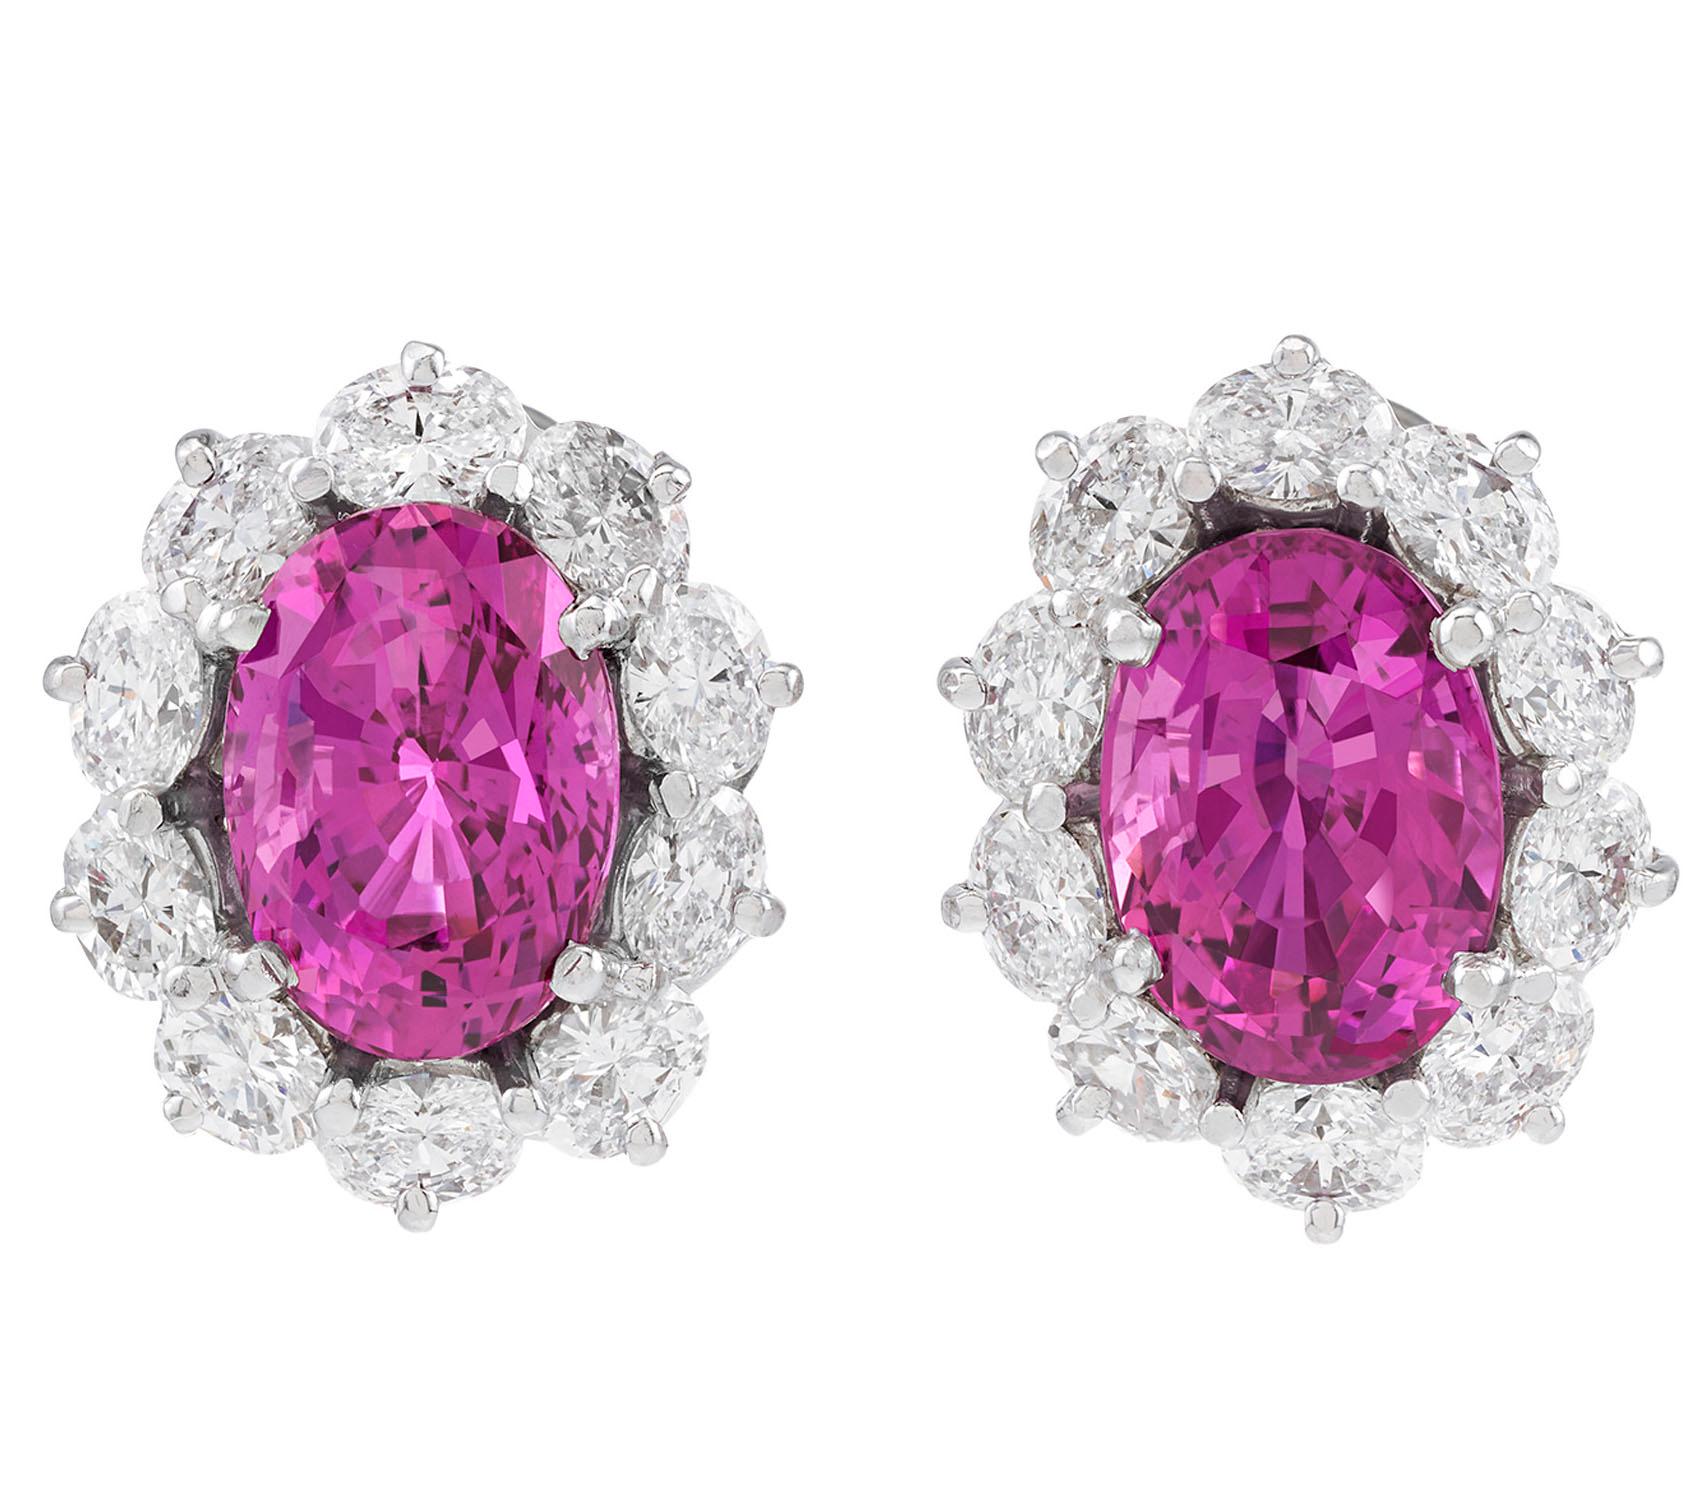 Vivid color and incredible transparency set these untreated pink Ceylon sapphires apart from all others. Weighing a combined 9.30 carats, these oval, modified brilliant-cut jewels are certified by Gübelin Gem Lab to have no indications of heat